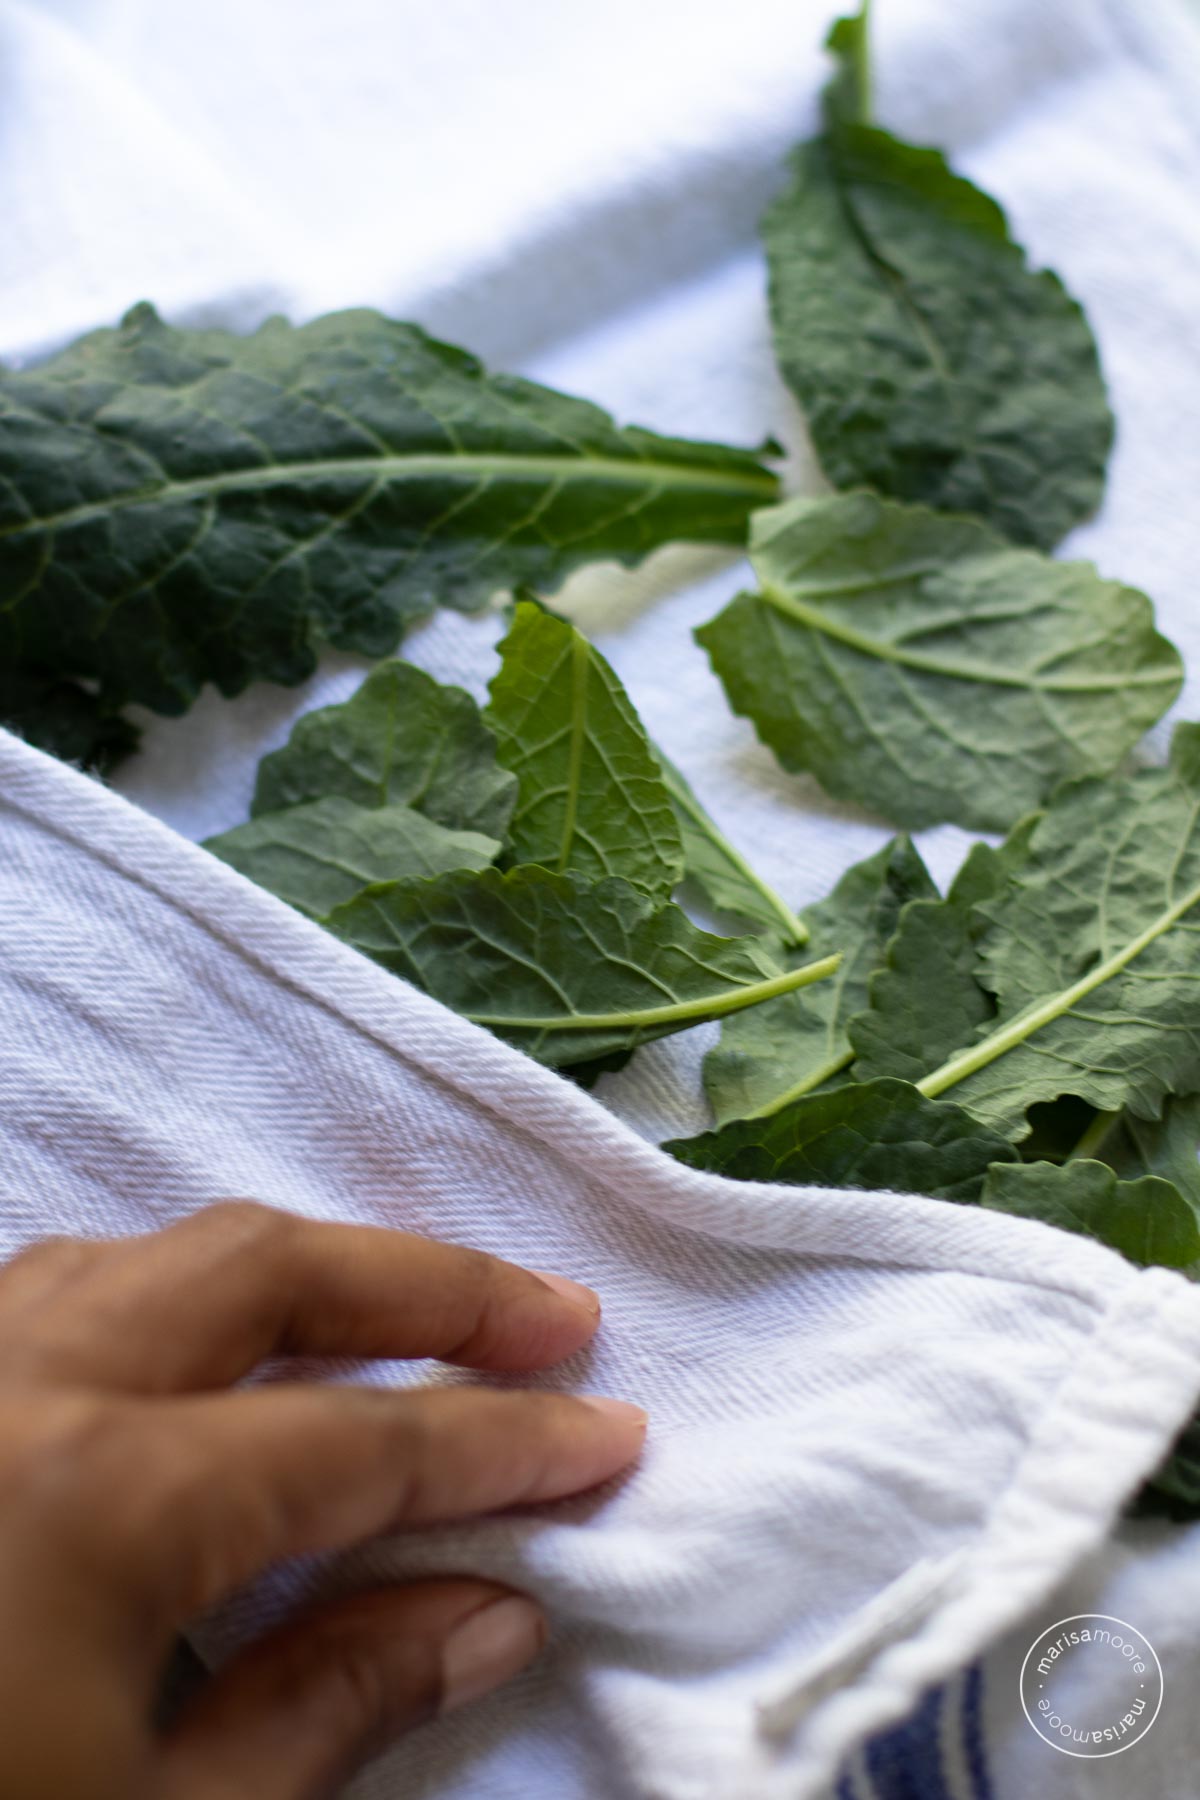 Marisa's hand drying kale leaves with a white kitchen towel.